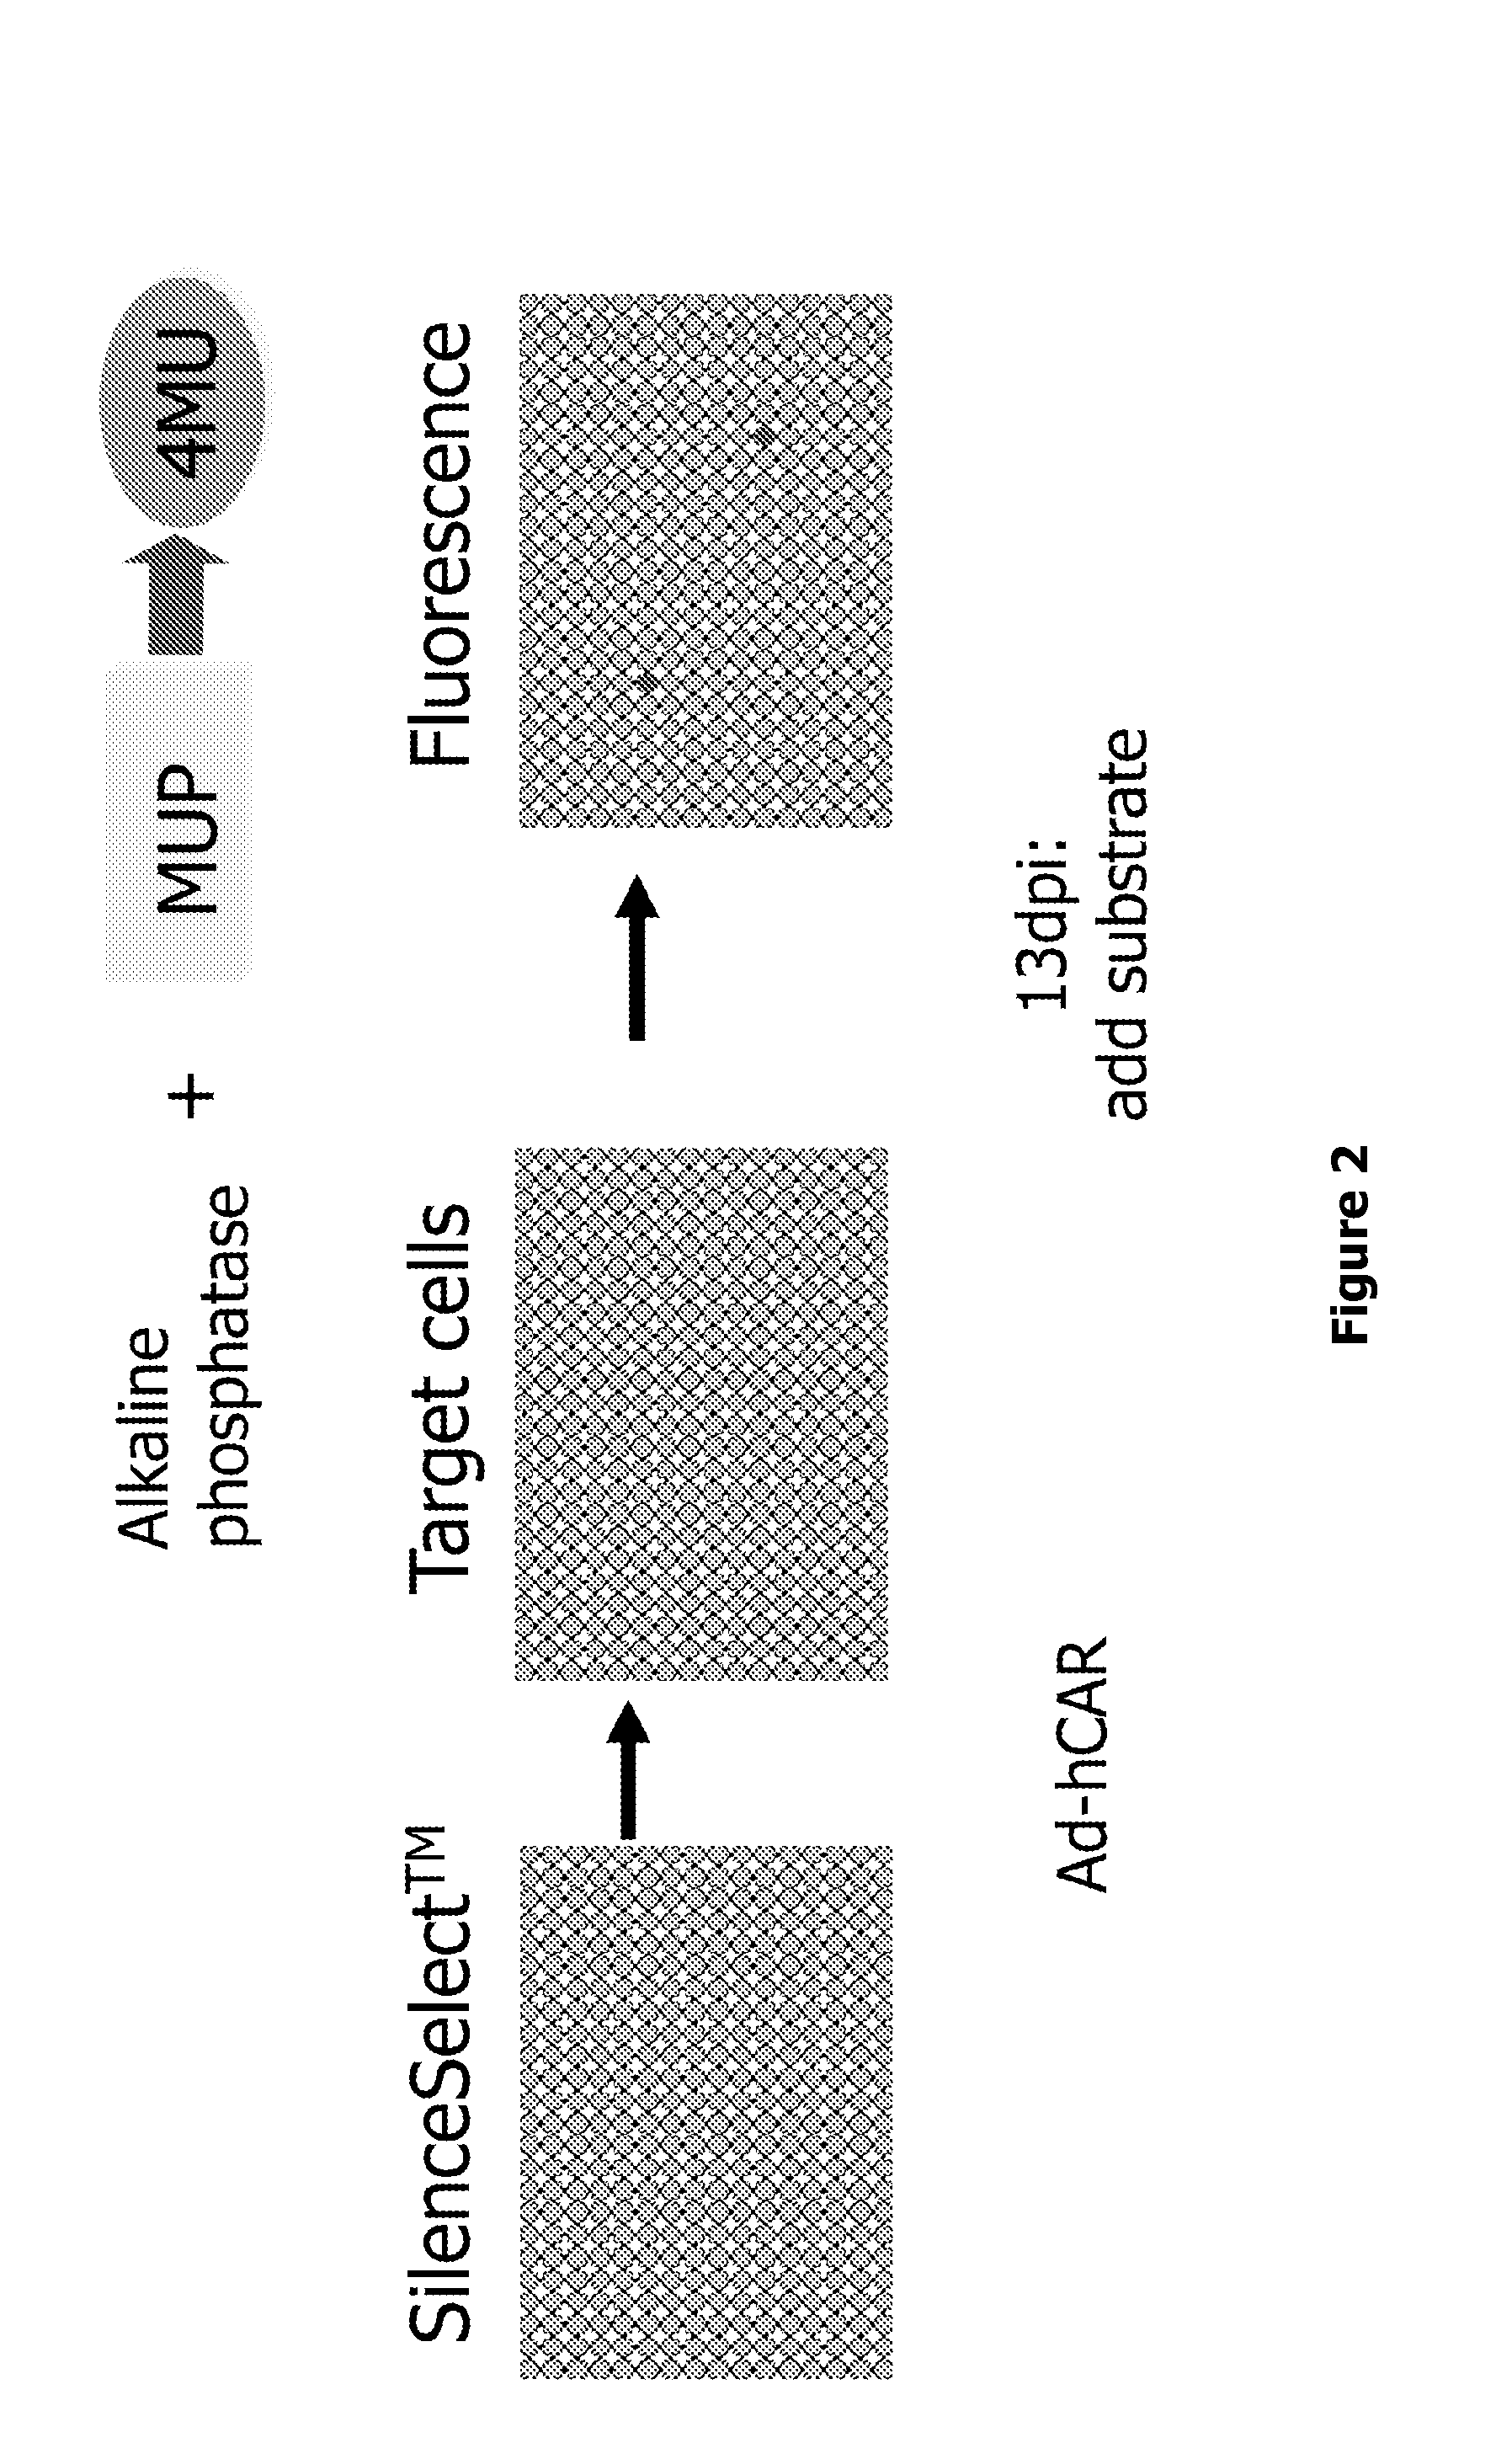 Methods, Agents, and Compound Screening Assays for Inducing Differentiation of Undifferentiated Mammalian Cells into Osteoblasts